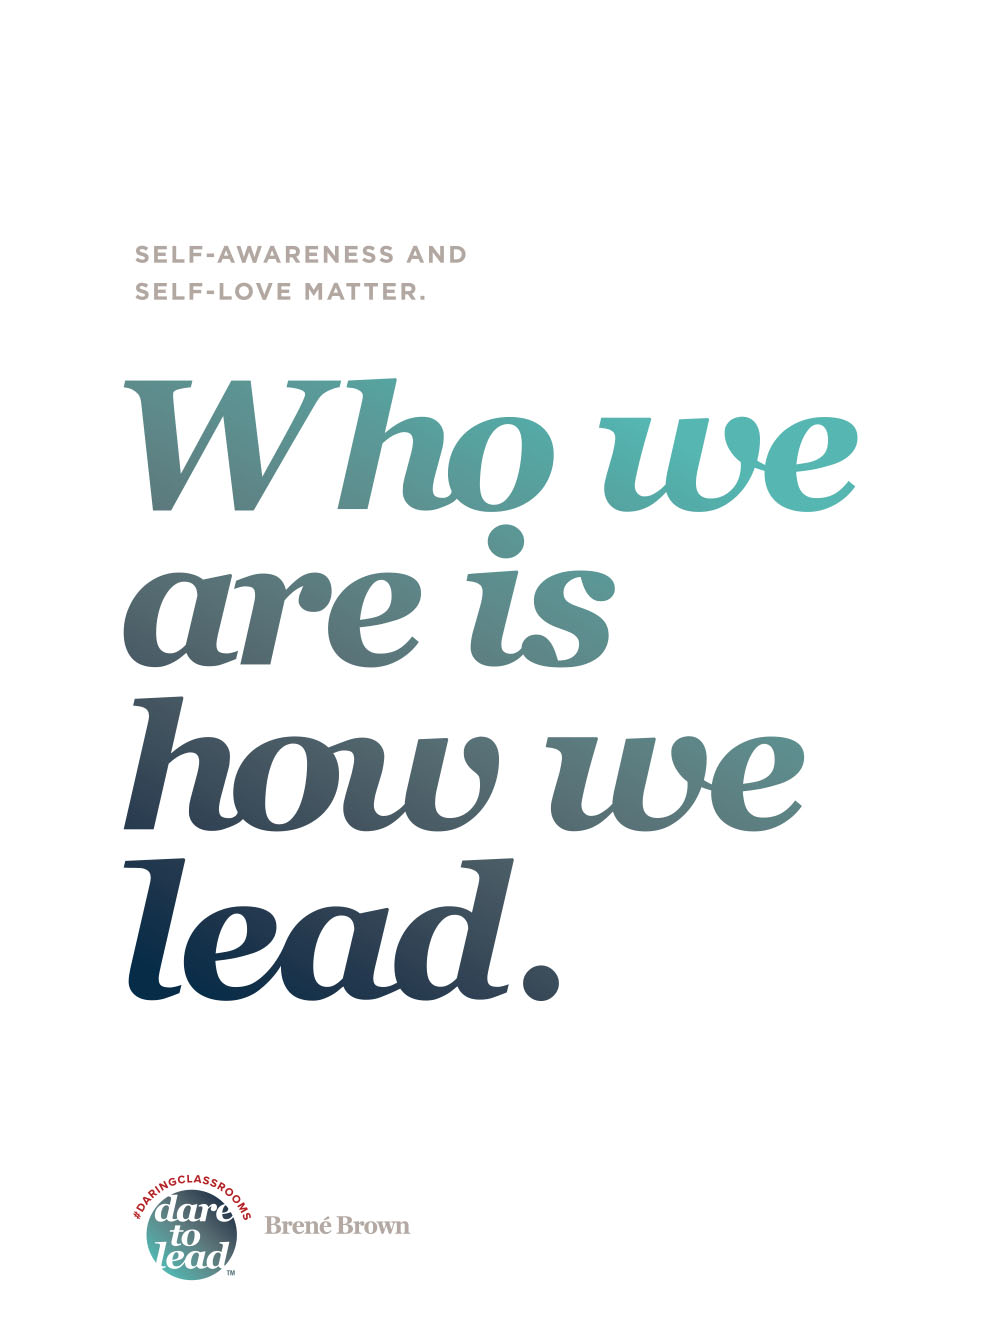 Self-awareness and self-love matter. Who we are is how we lead.